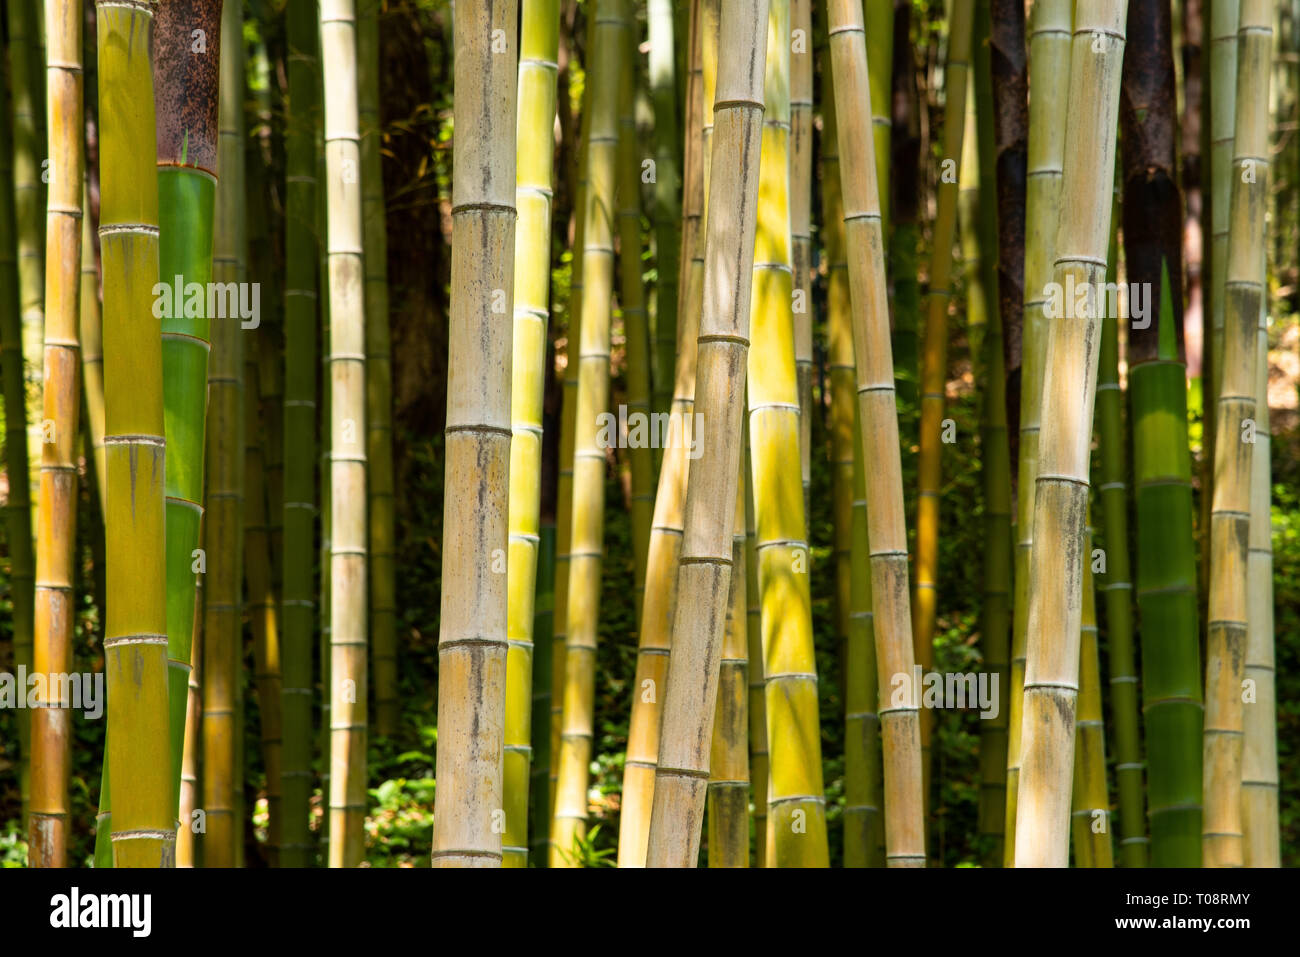 bamboo plants background in a forest Stock Photo